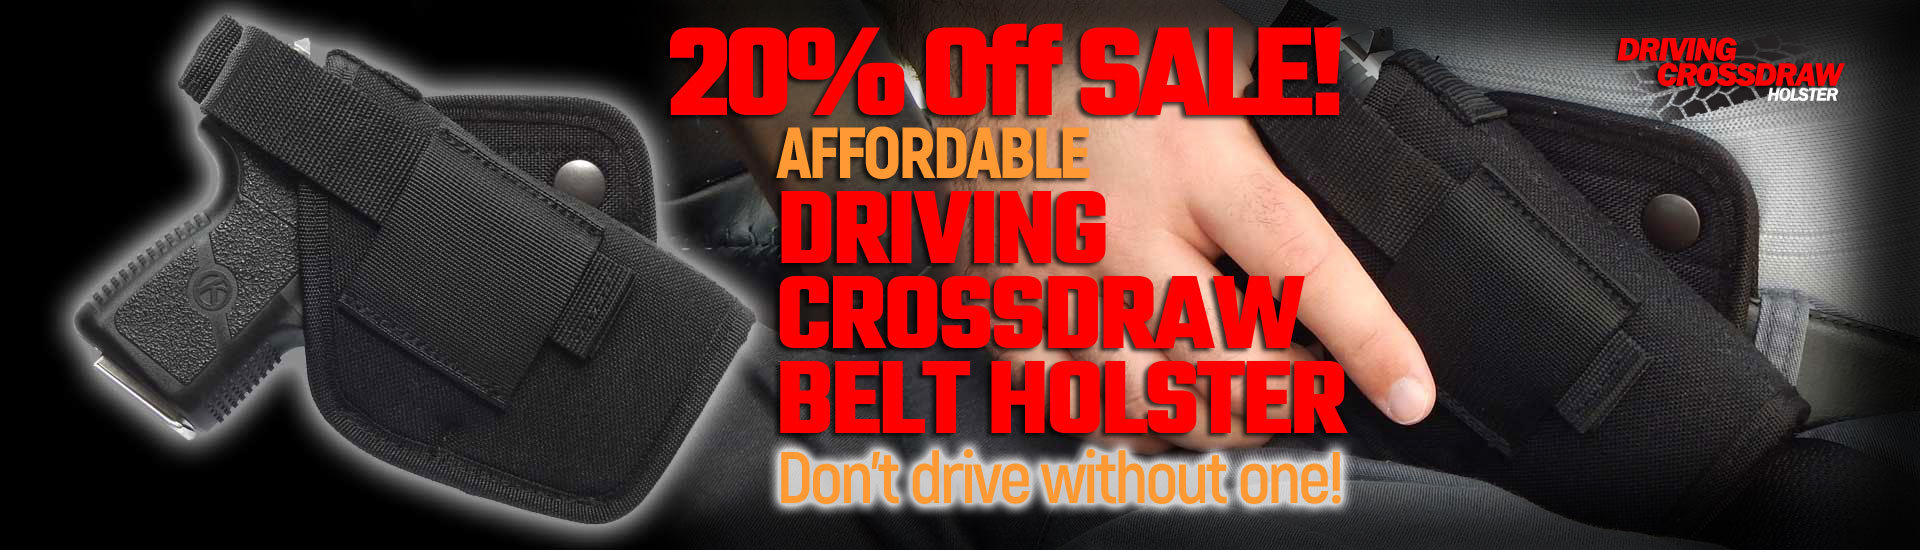 Driving Holster 20% SALE